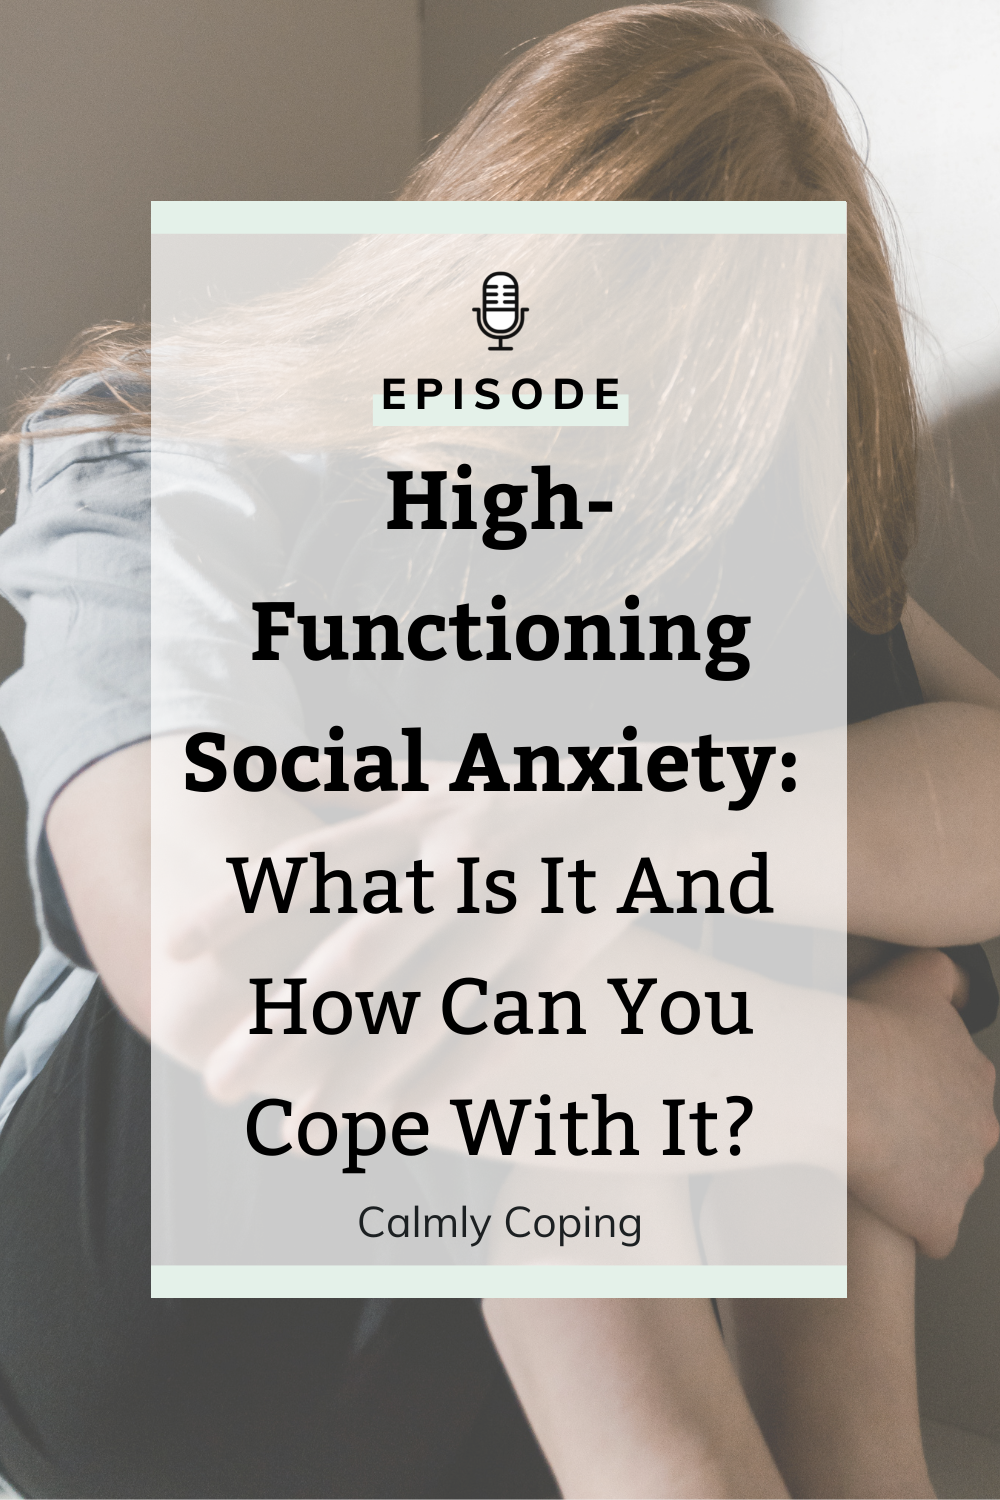 High-Functioning Social Anxiety: What Is It And How Can You Cope With It?